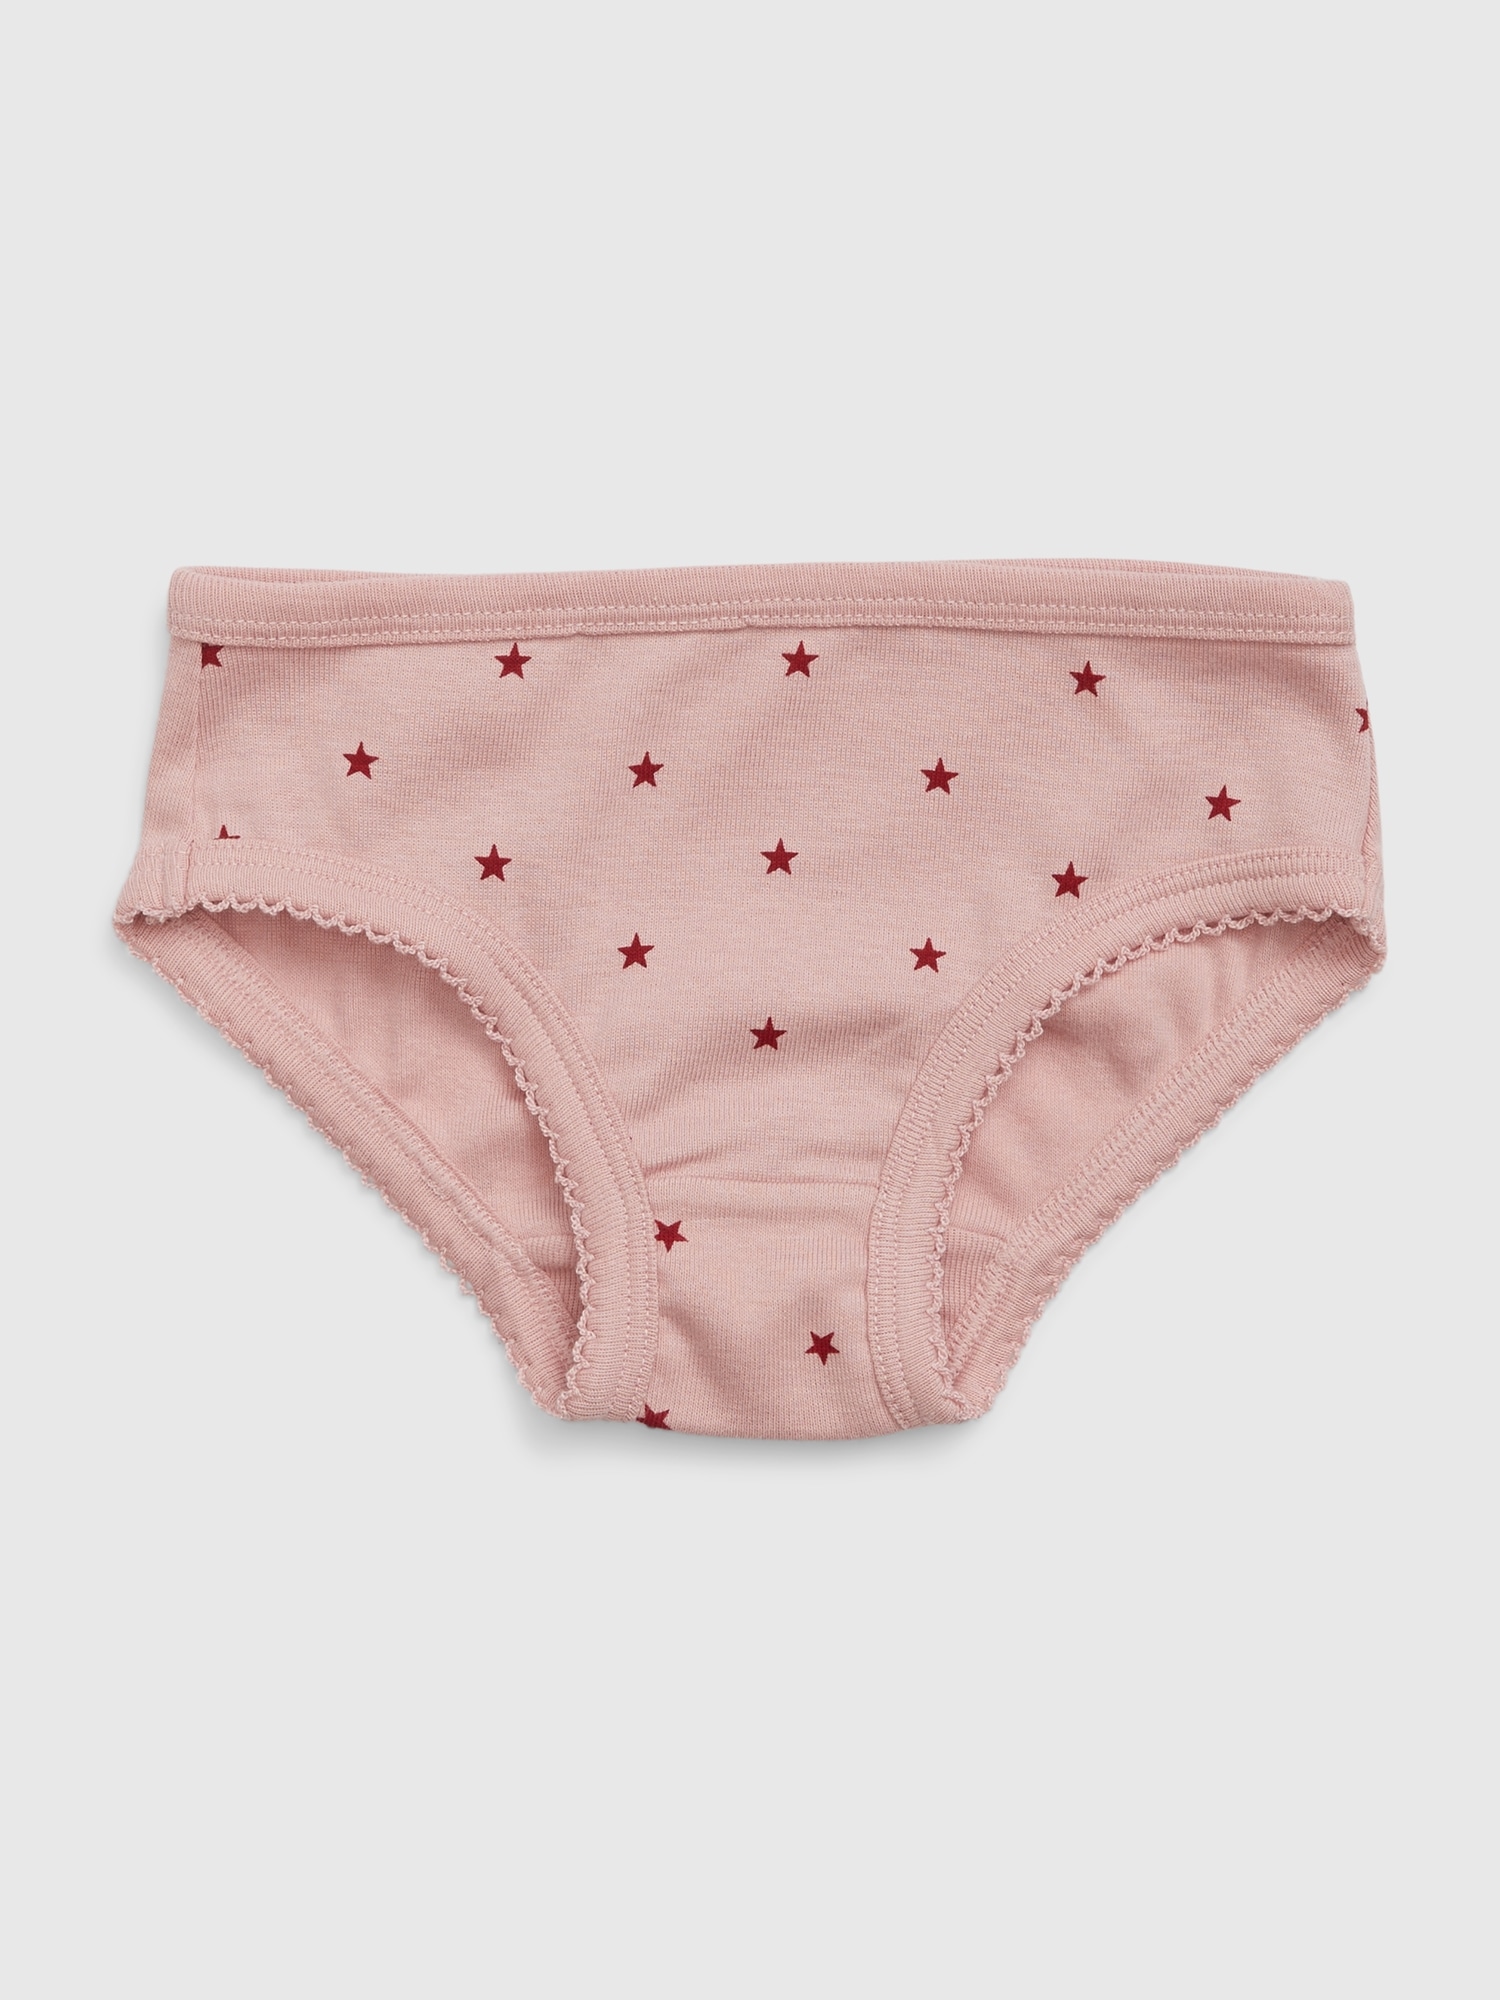 Organic Cotton & Natural Fiber Dyed Pink & Pomo Yellow Combo Underwear -  Pack of 2 - Buy on Upcycleluxe